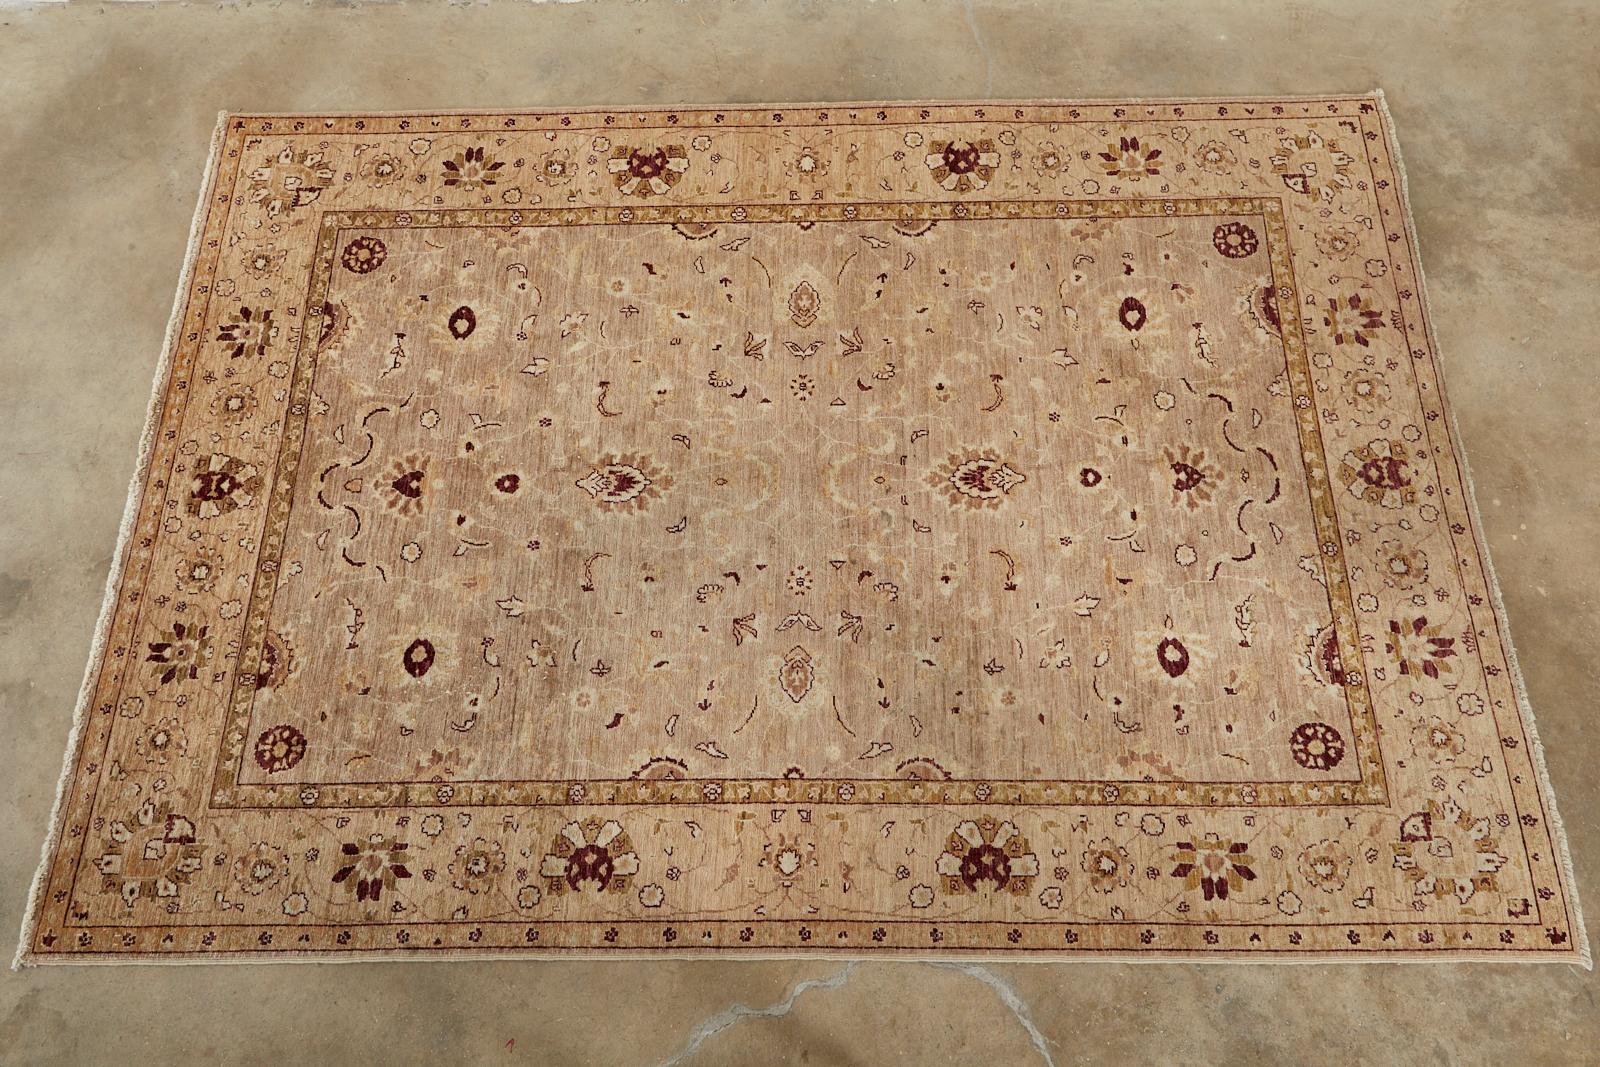 Distinctive beige field rug or carpet made in the style of East Turkestan Khotan with dense hand knotted wool. Decorated with stylized flowers and vines in muted greens and browns. From an estate in San Francisco, CA.